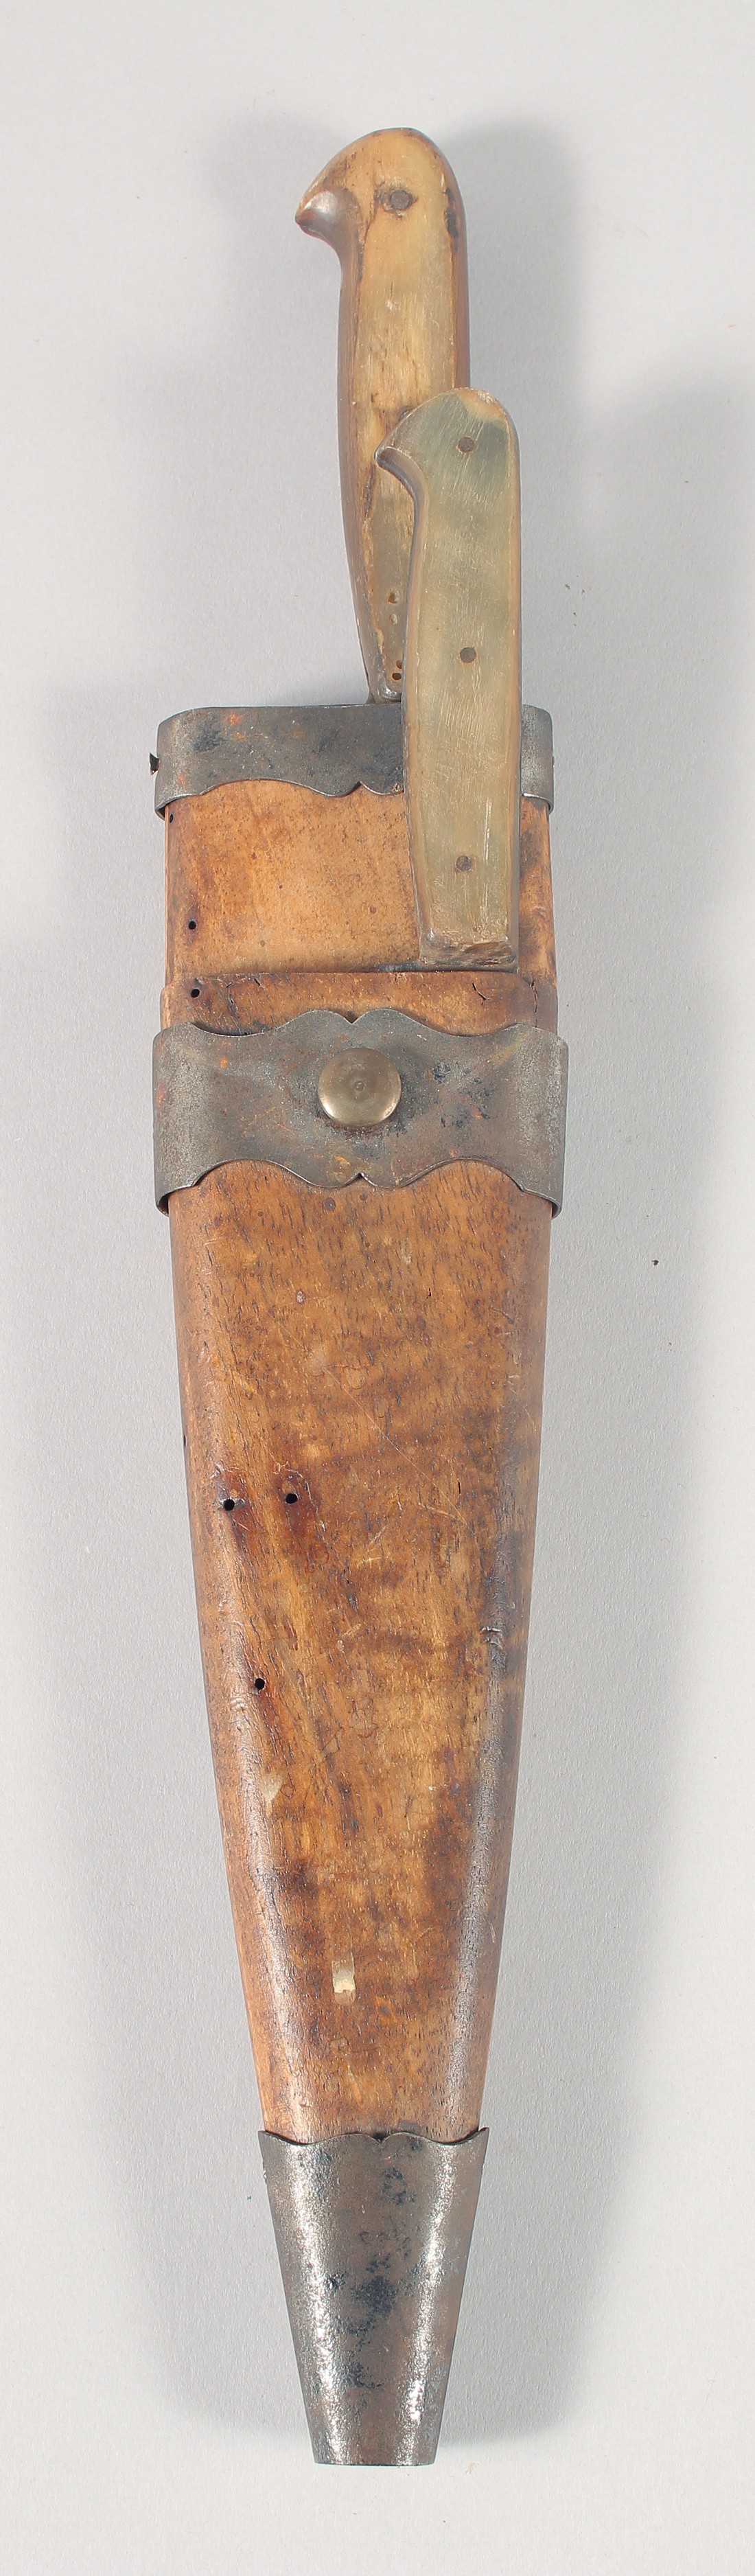 AN EARLY BORDET KNIFE 13" LONG AND A ACIER FONJU KNIFE 11" LONG, both with horn handles, in a - Image 2 of 2